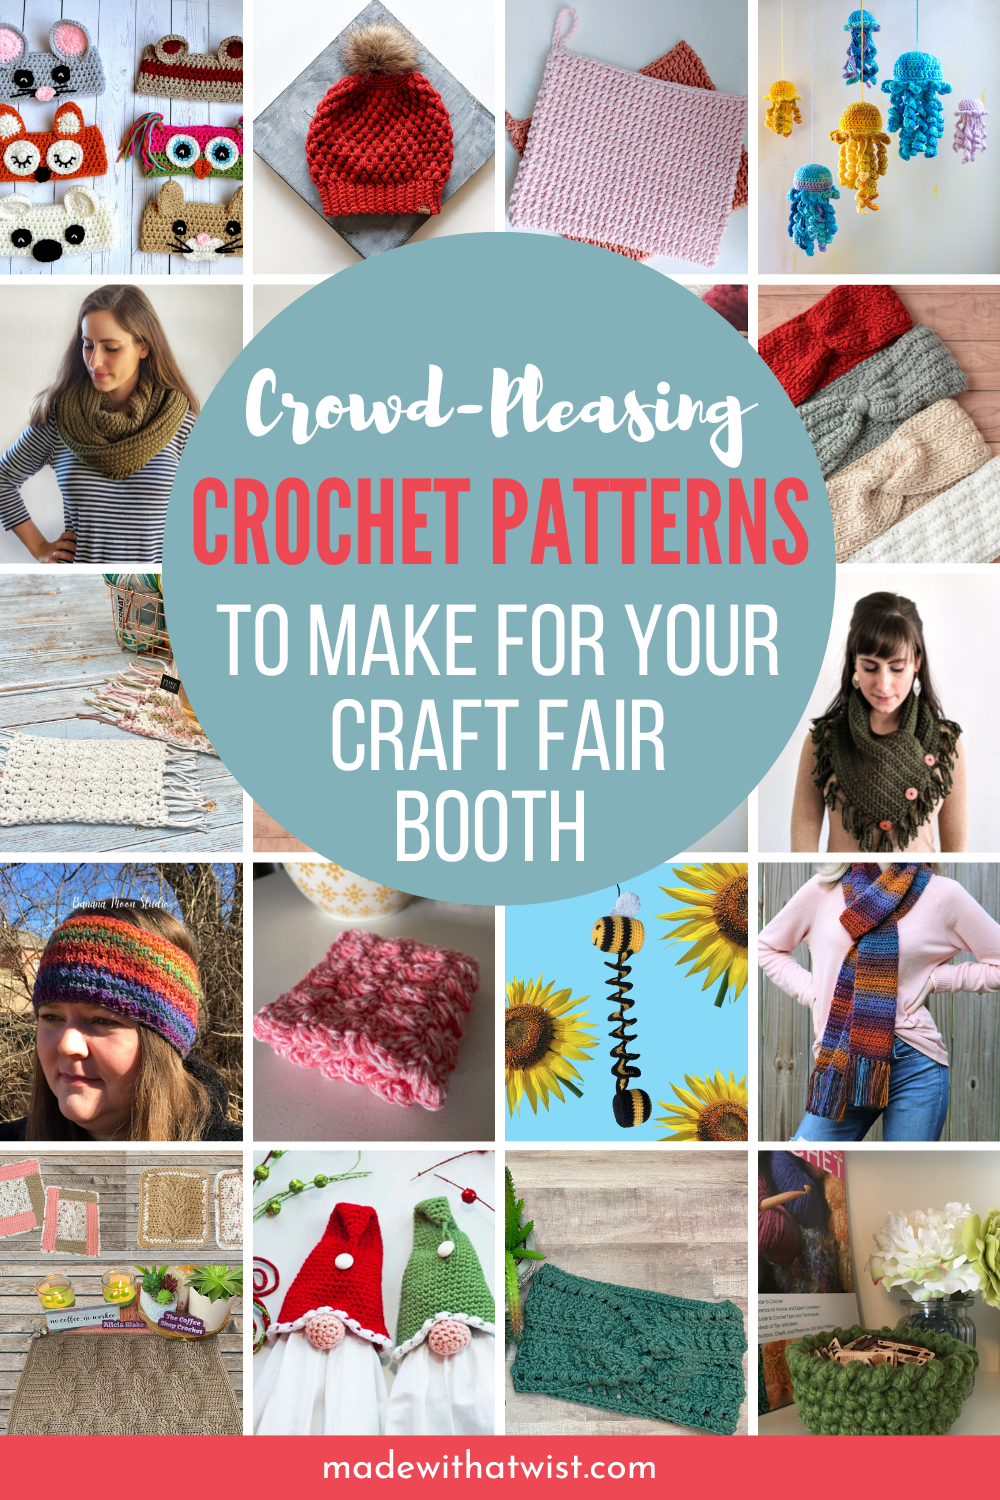 17 Crowd-Pleasing Crochet Patterns for Craft Fairs and Markets